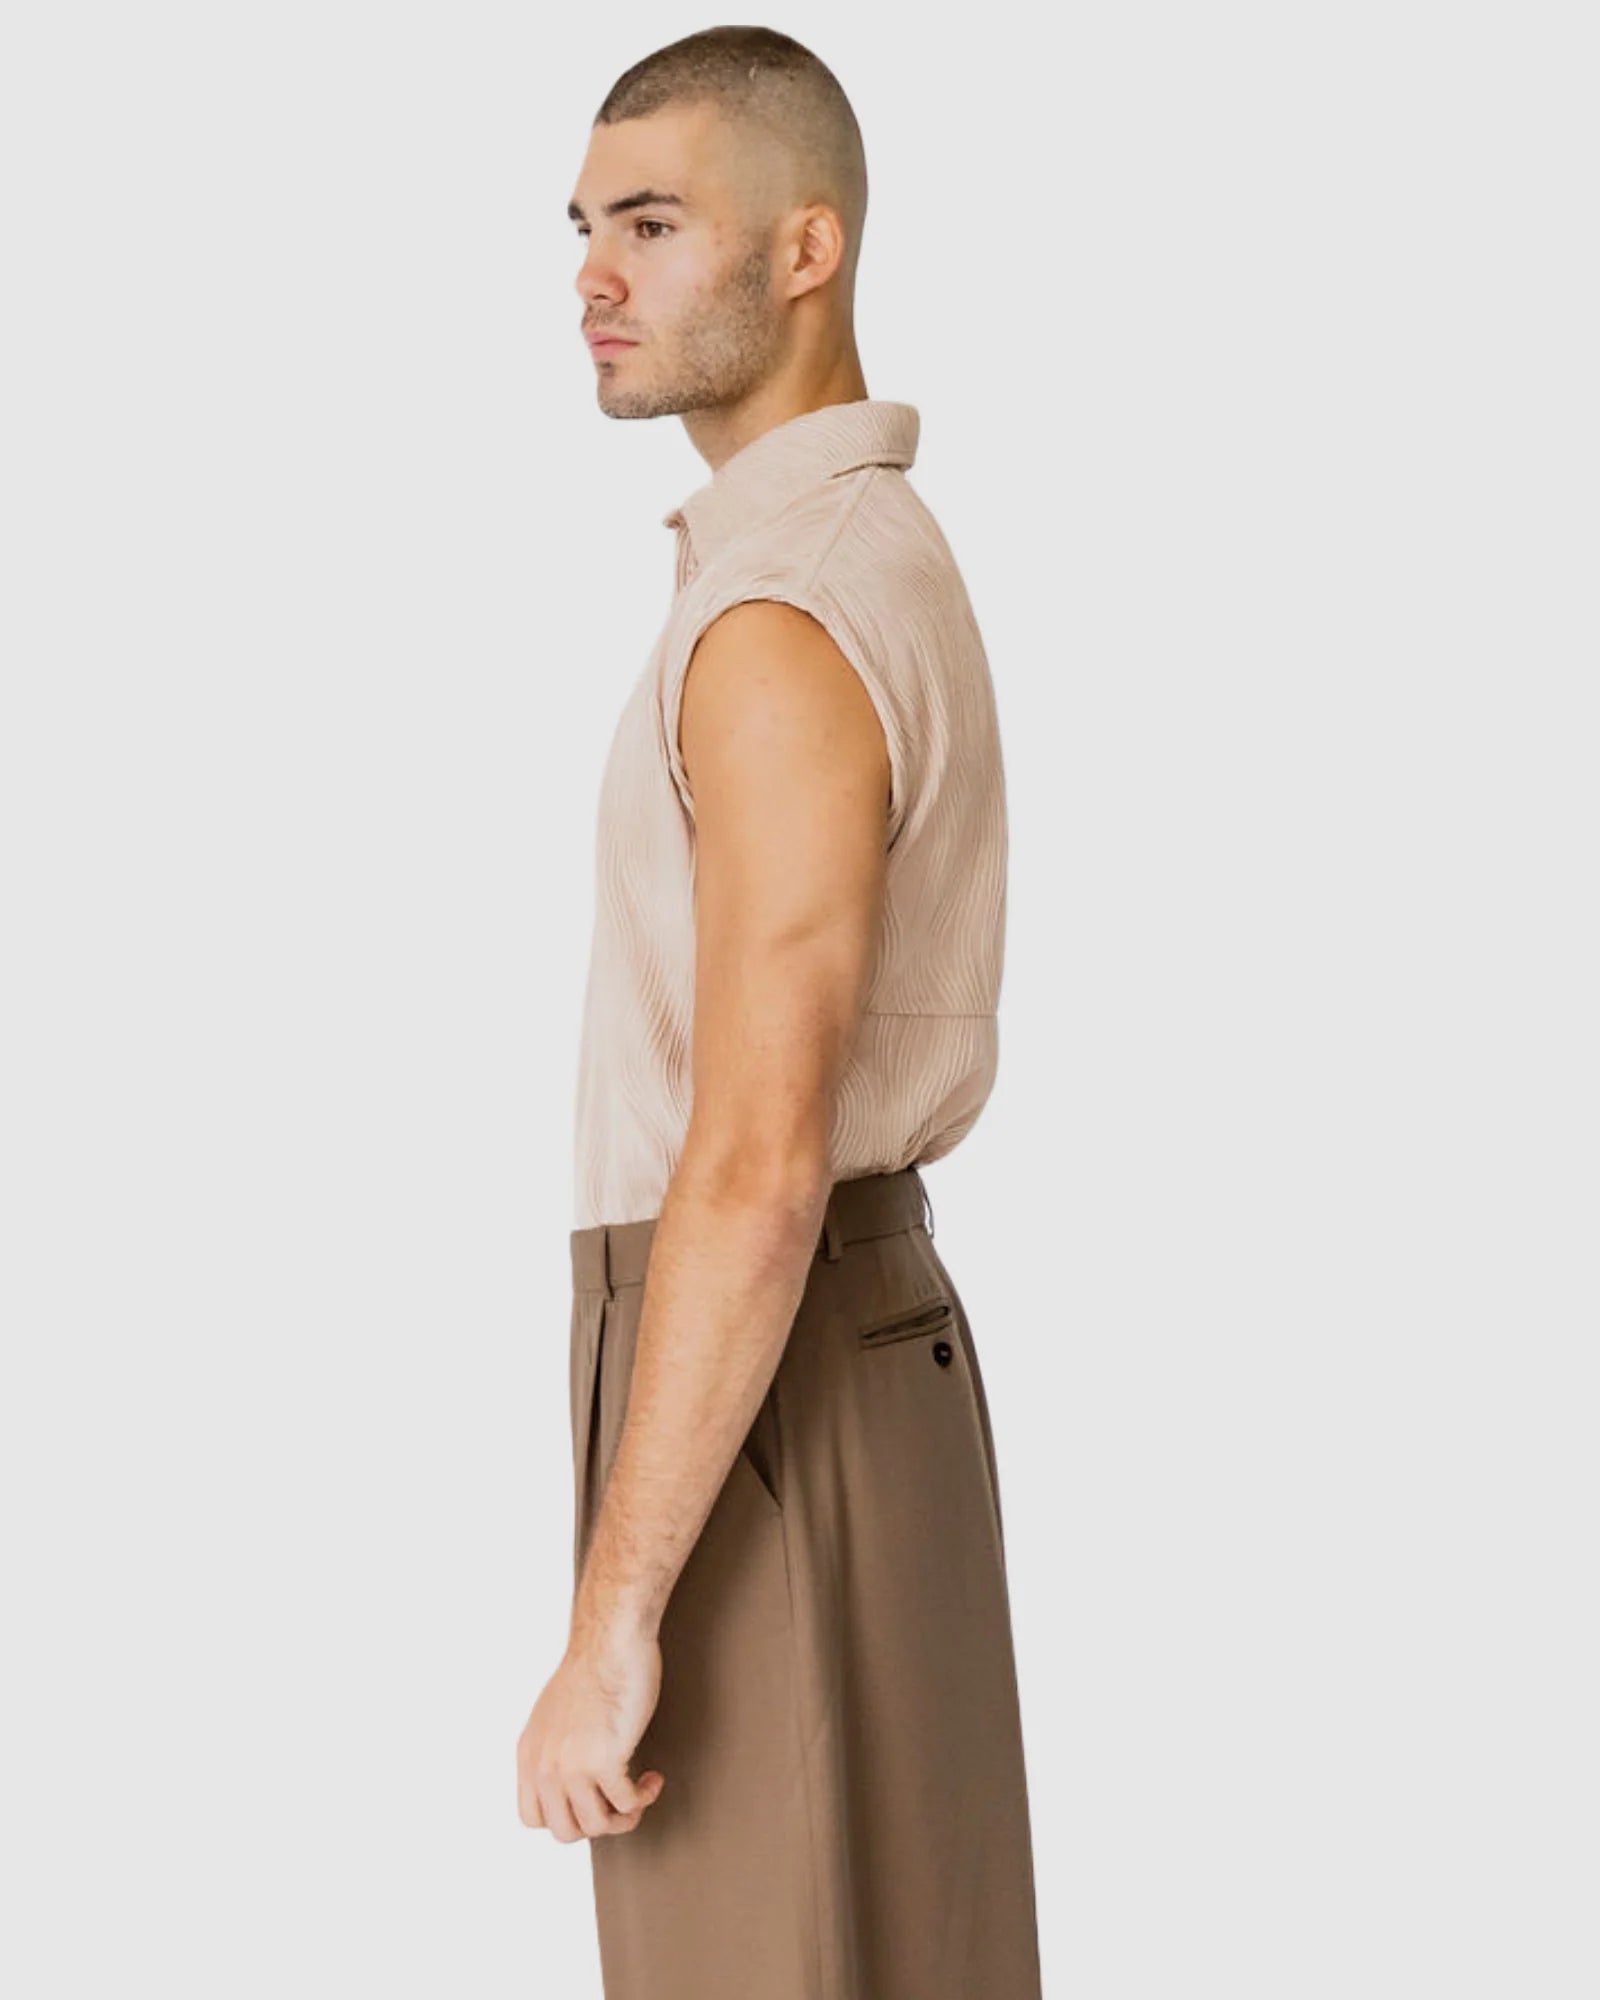 Justin Cassin Verve Sleeveless Shirt in Brown Color 3